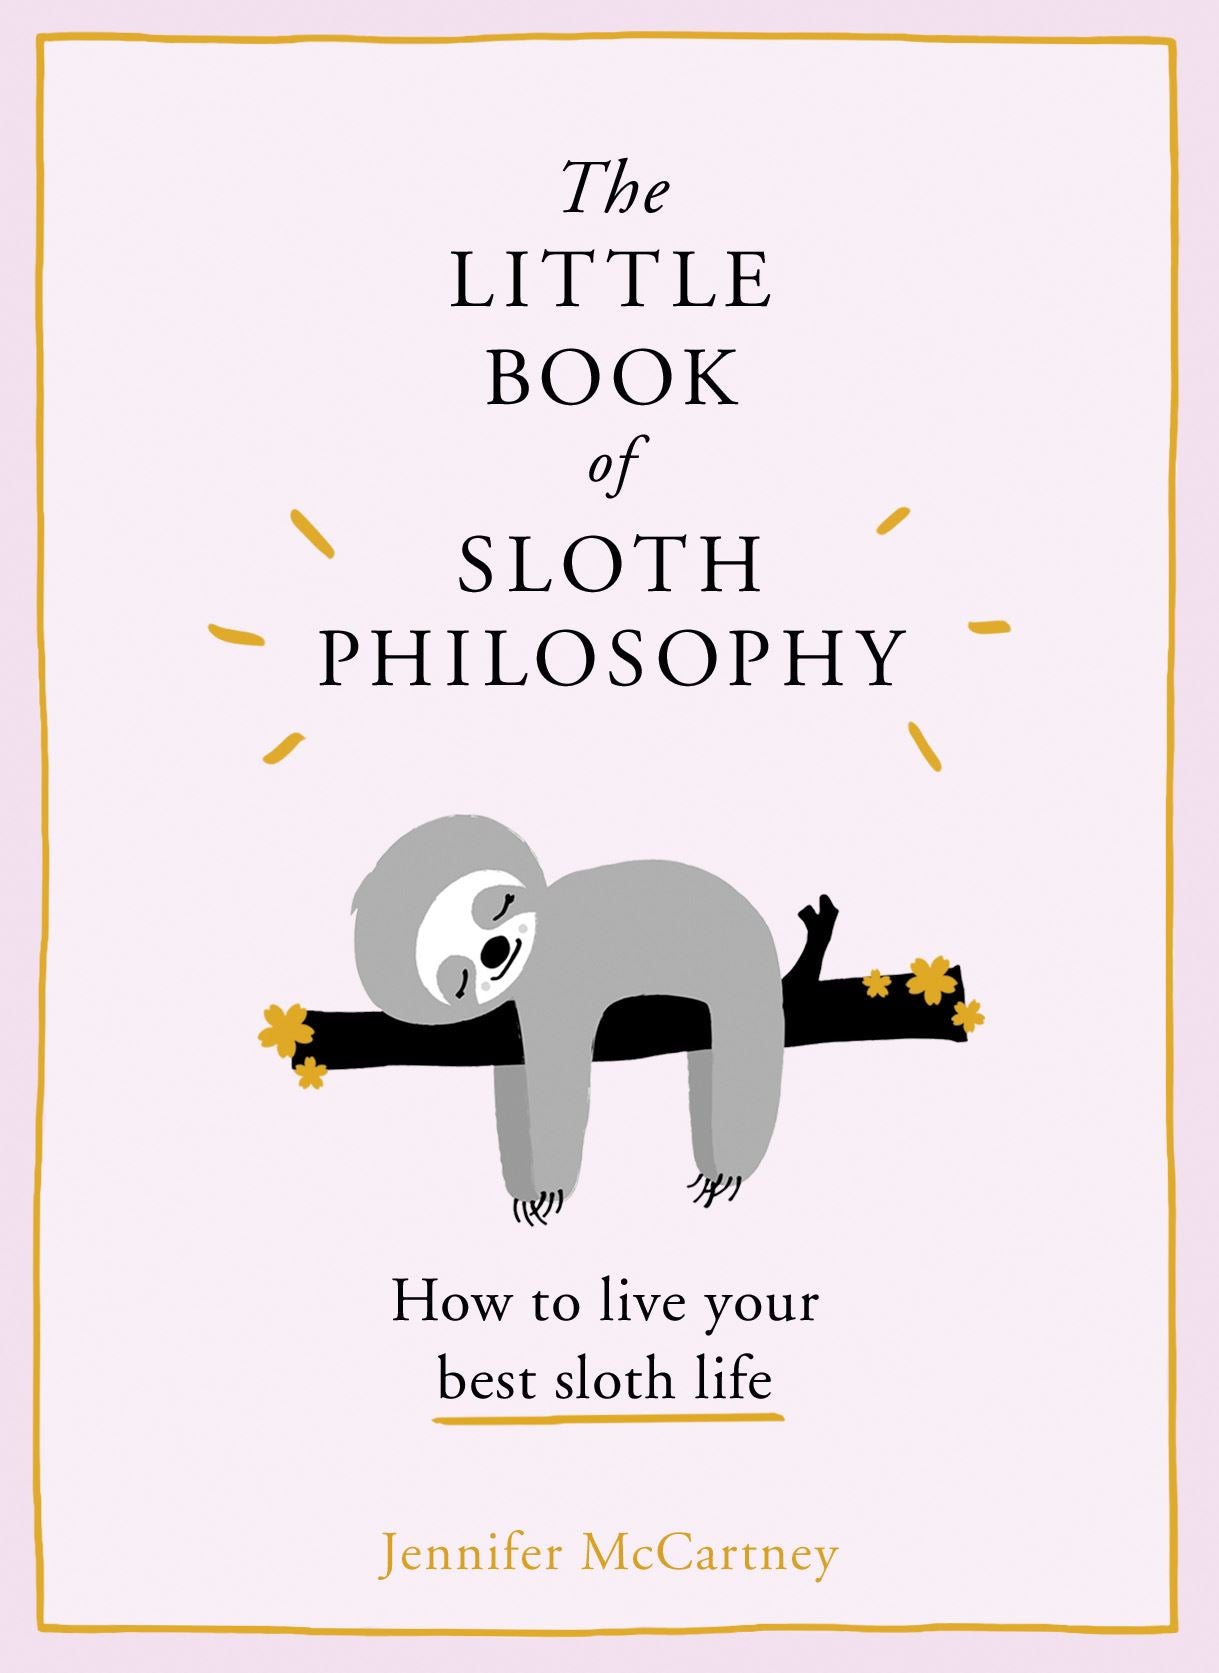 LITTLE BOOK OF SLOTH PHILOSOPHY